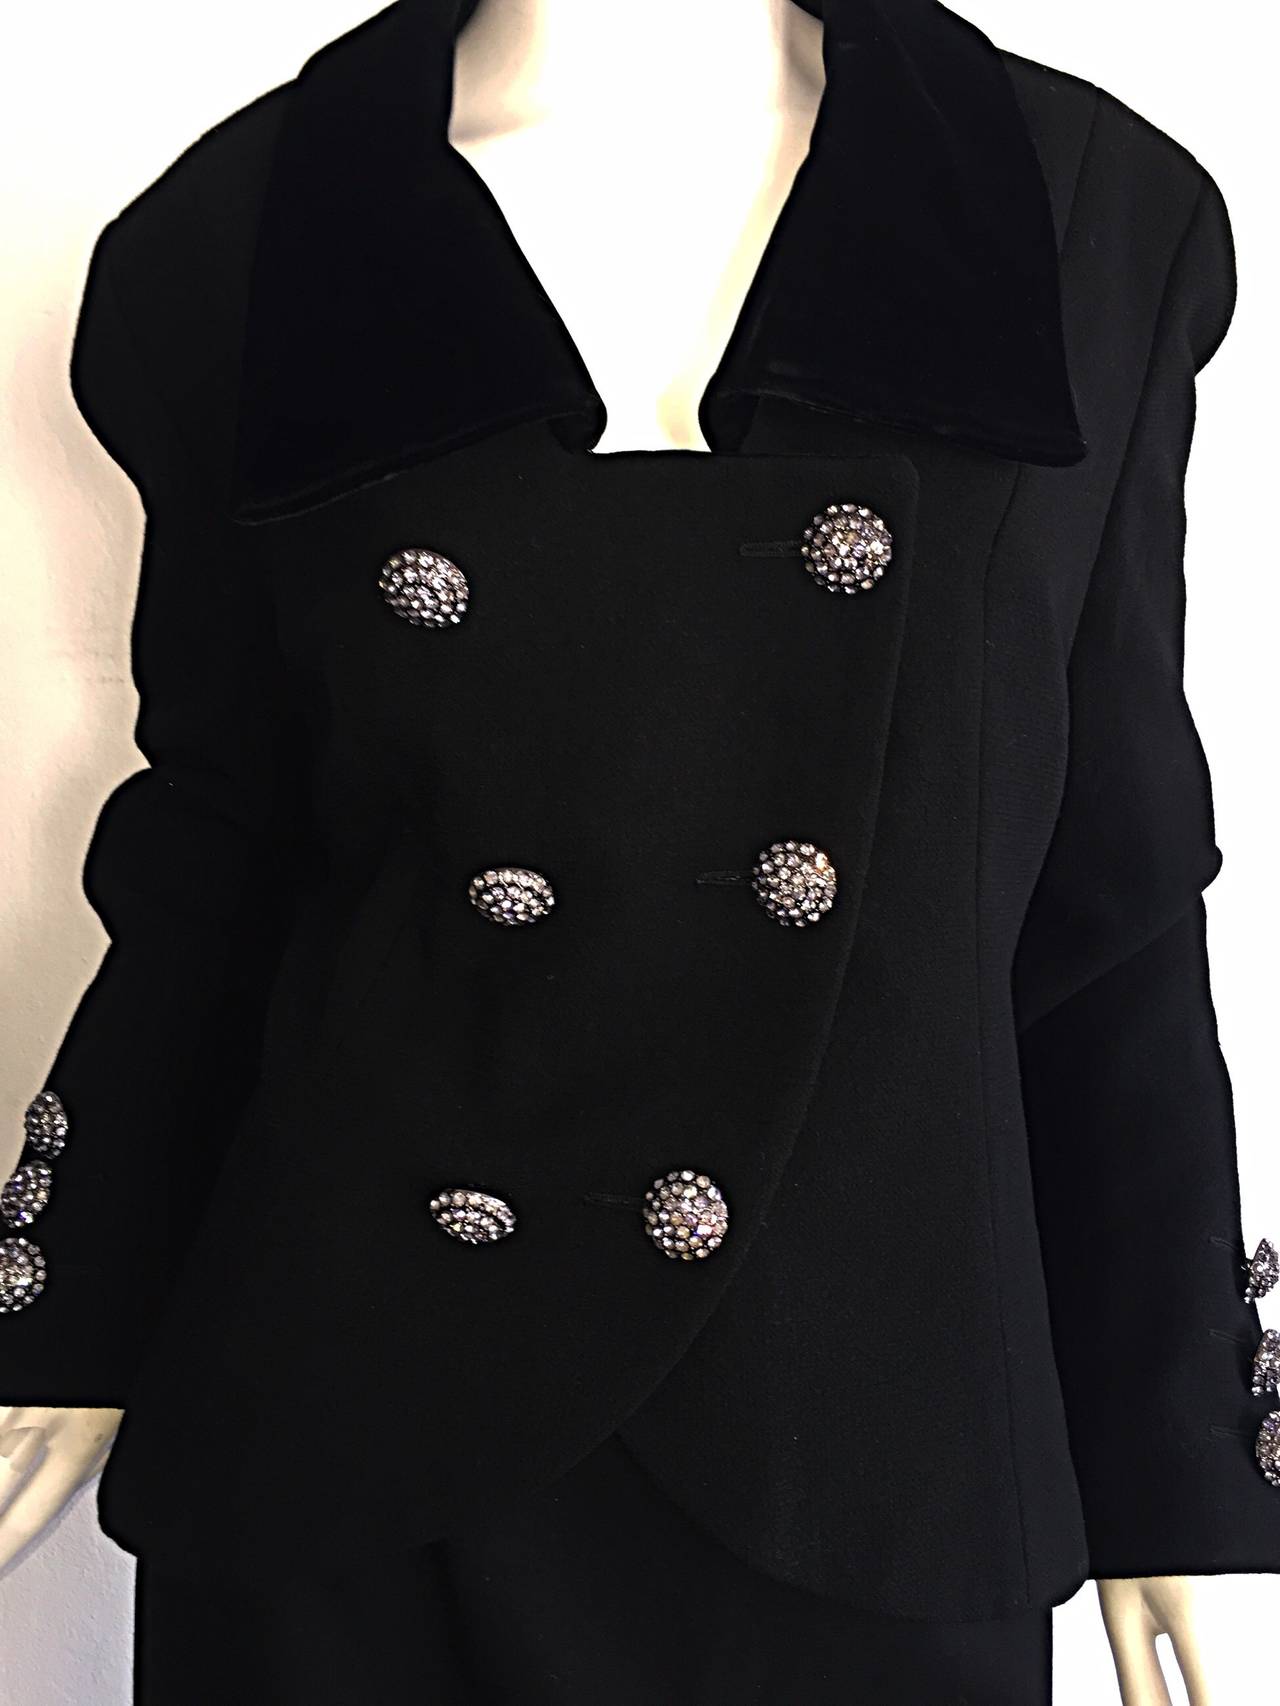 Vintage Andrea Odicini Couture Black Skirt Suit + Rhinestone Buttons Size Large In Excellent Condition For Sale In San Diego, CA